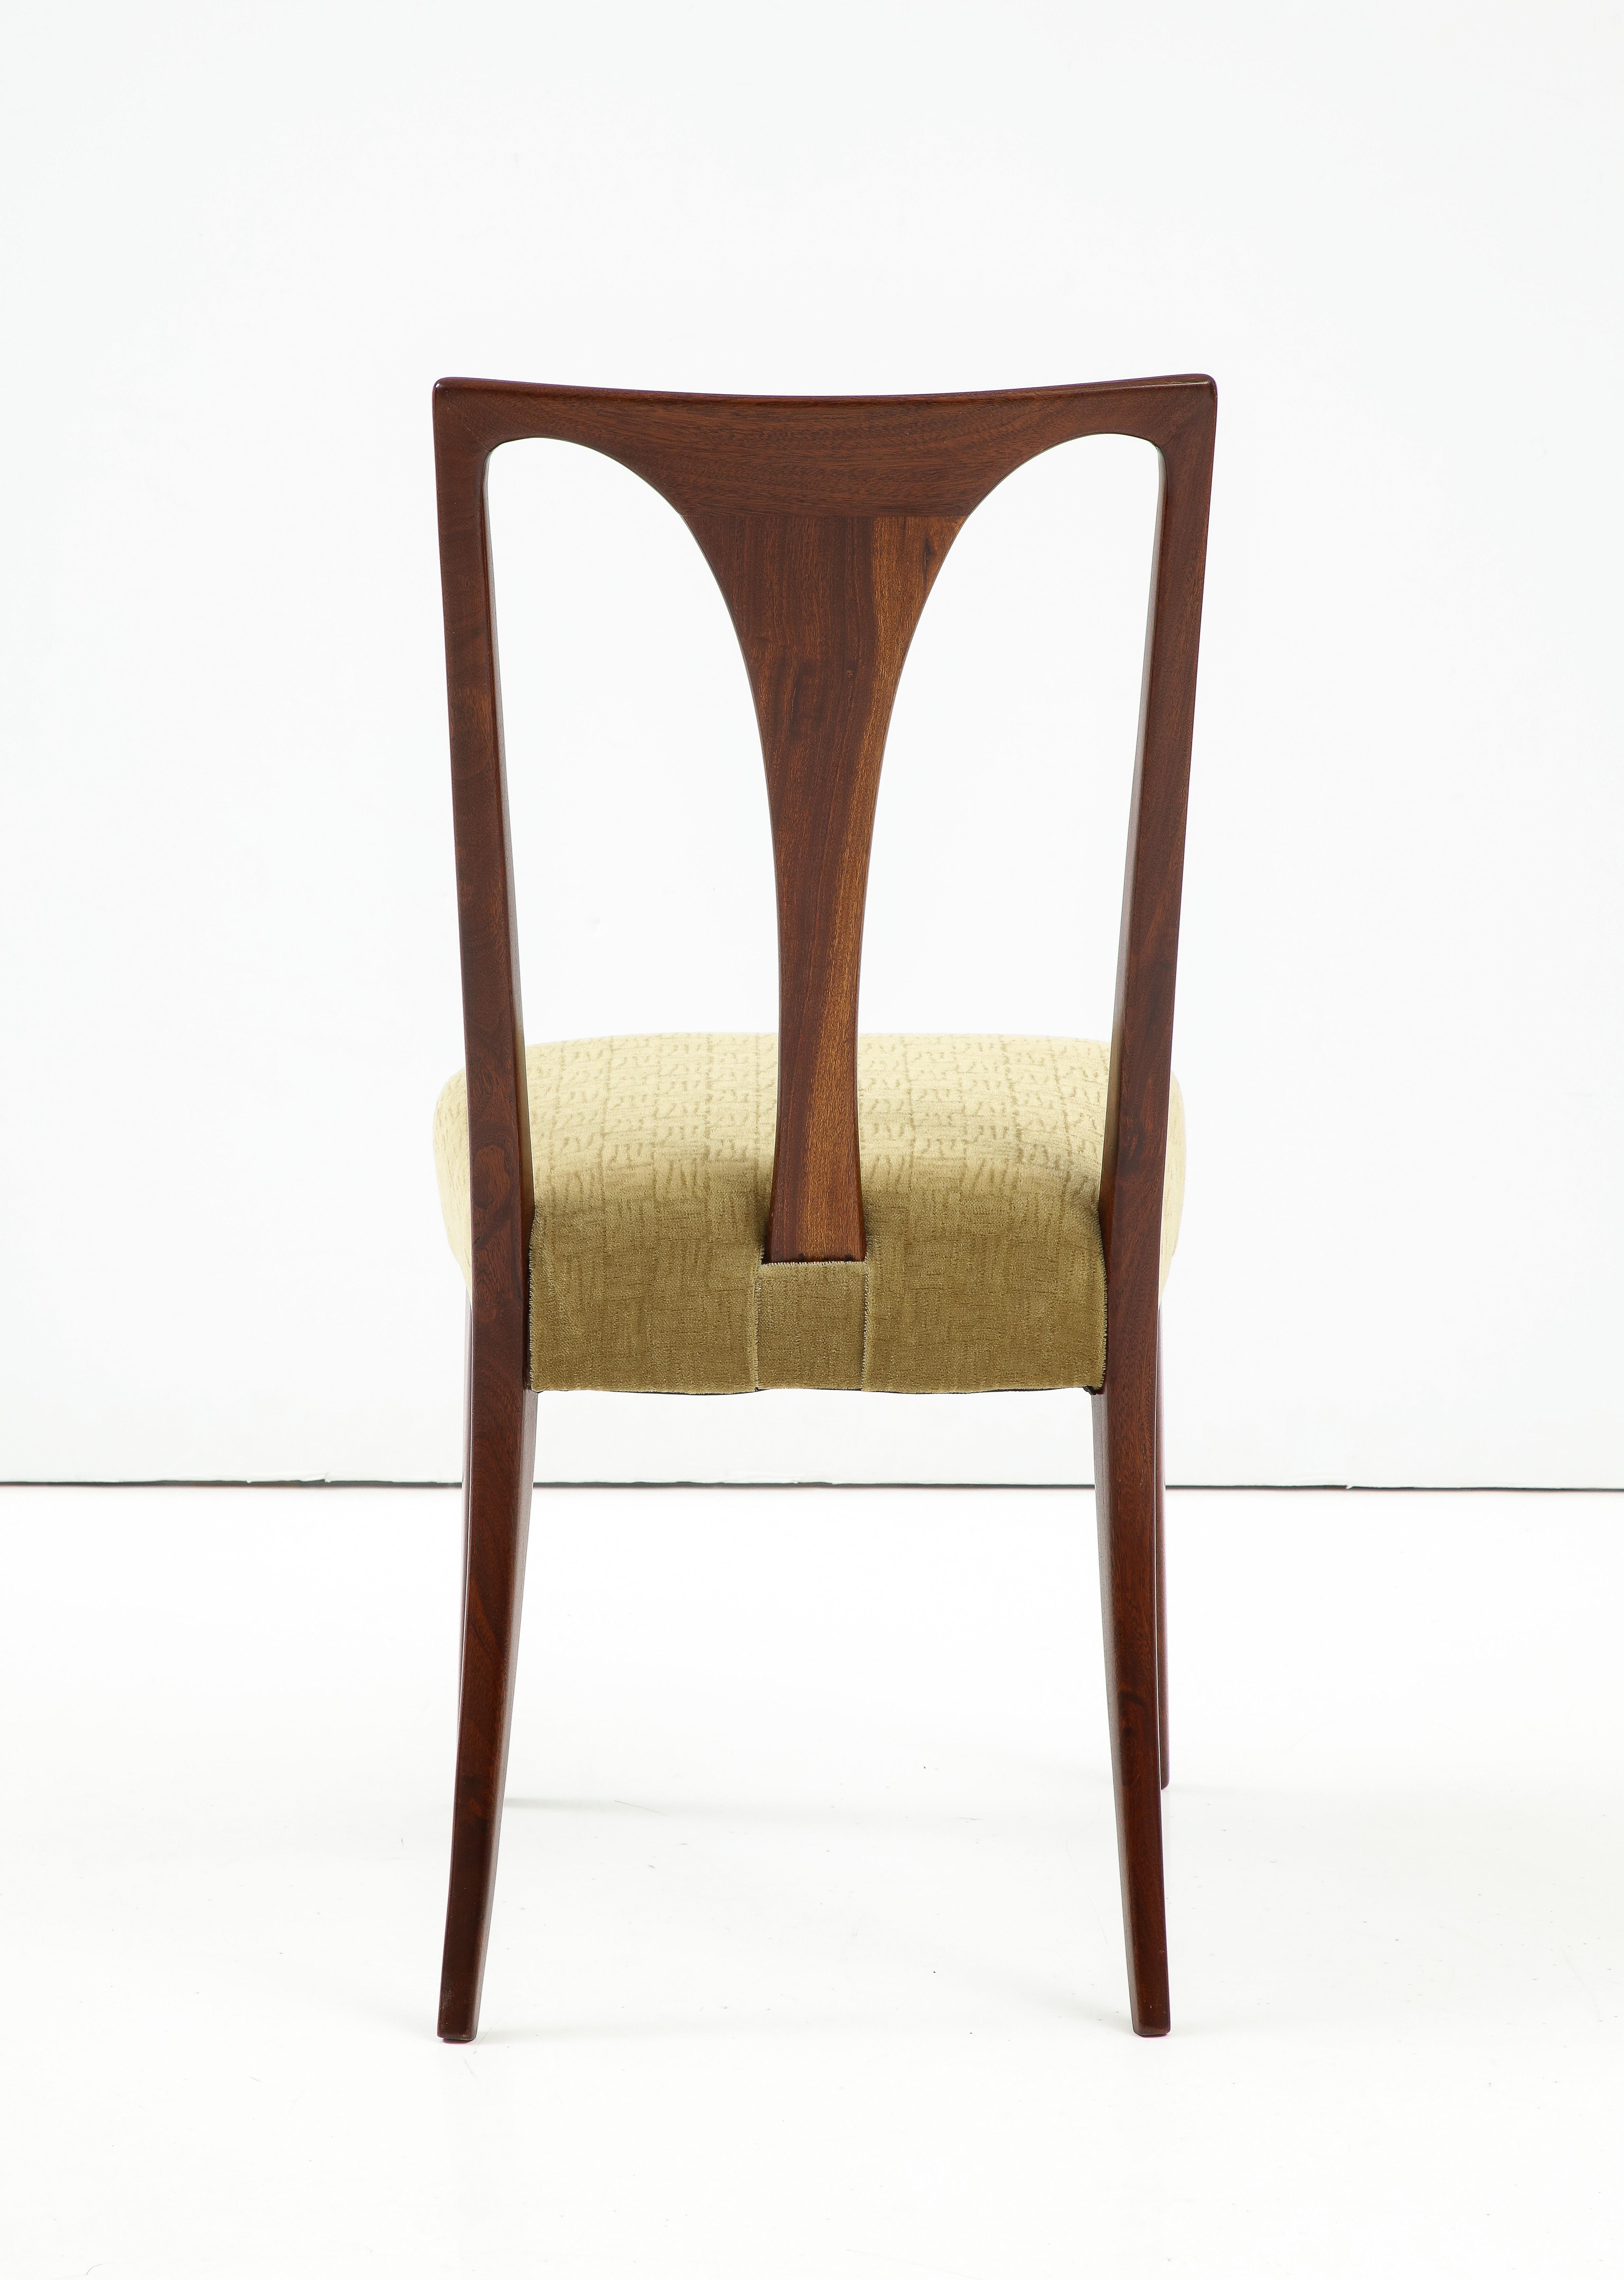 Mid-20th Century 1960's Mid-Century Modern Italian Dining Chairs In The Style Of Carlo De Carli